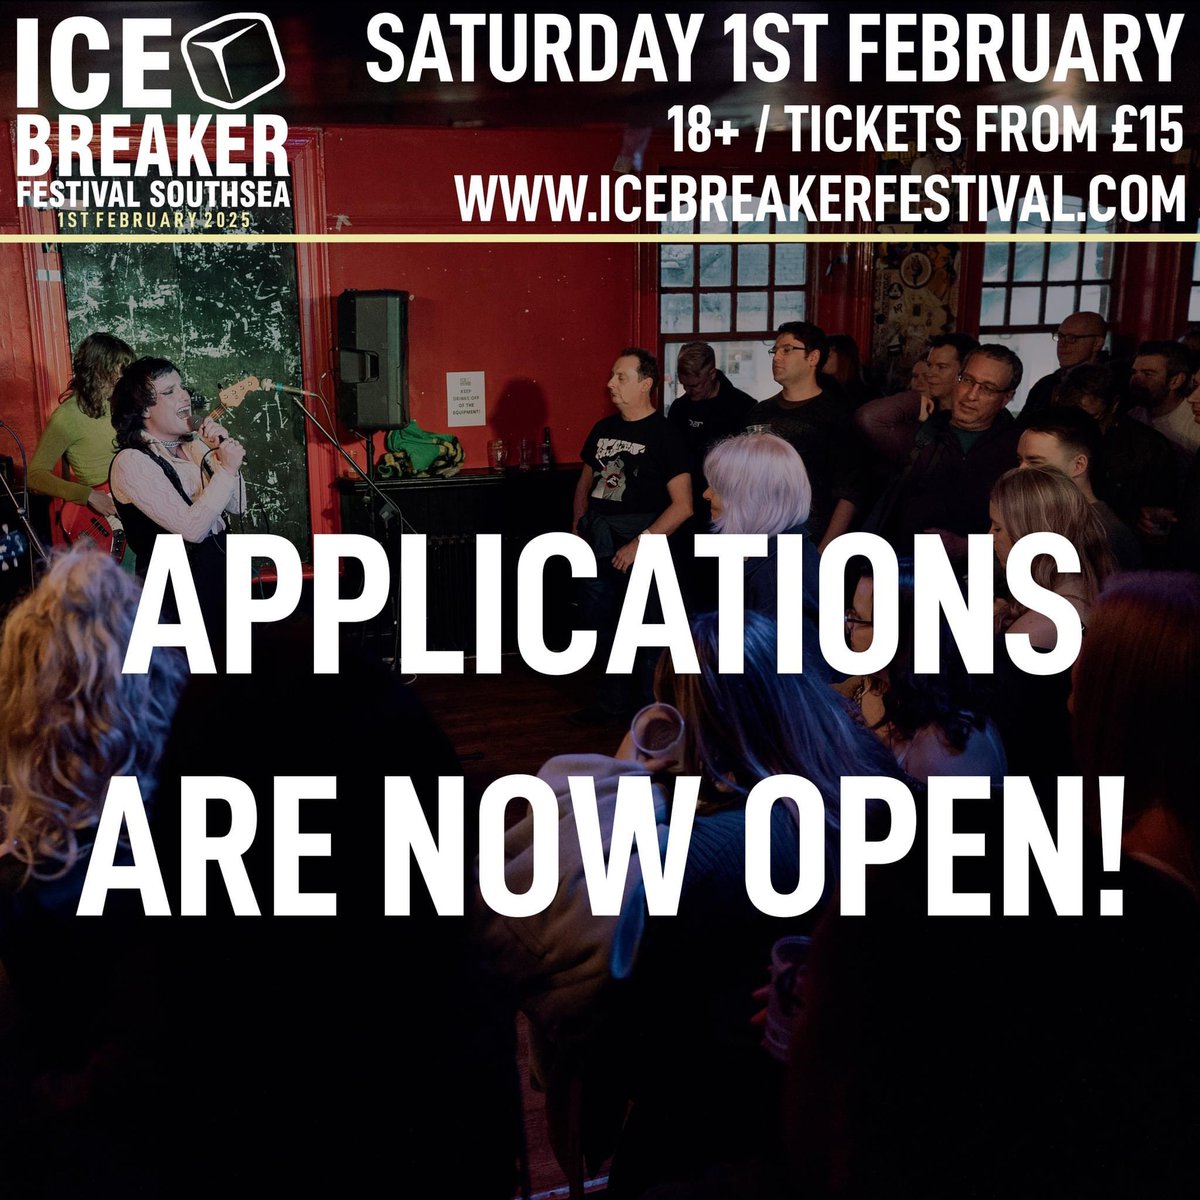 ICYMI... 🎟 Limited amount of Early Bird tickets are now on sale at £15. ✍ Applications to perform at #icebreaker11 are now open. icebreakerfestival.com